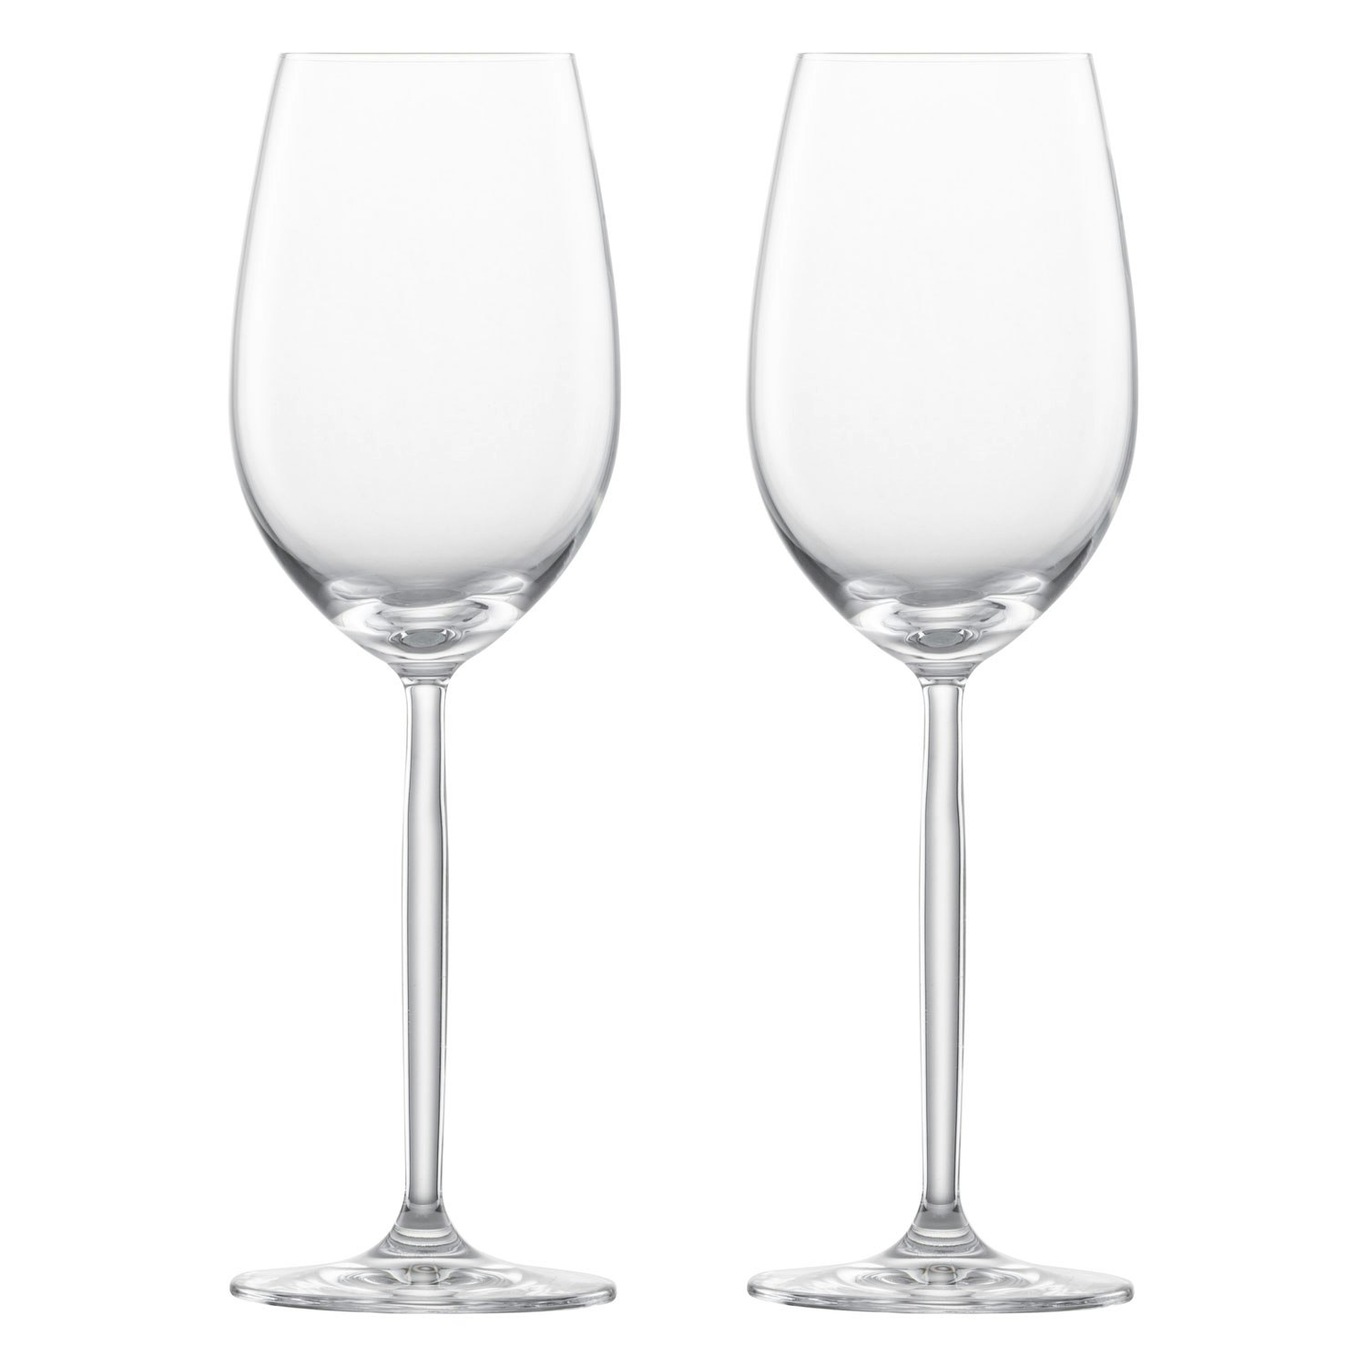 https://royaldesign.com/image/2/zwiesel-diva-champagne-glass-30-cl-2-pack-0?w=800&quality=80